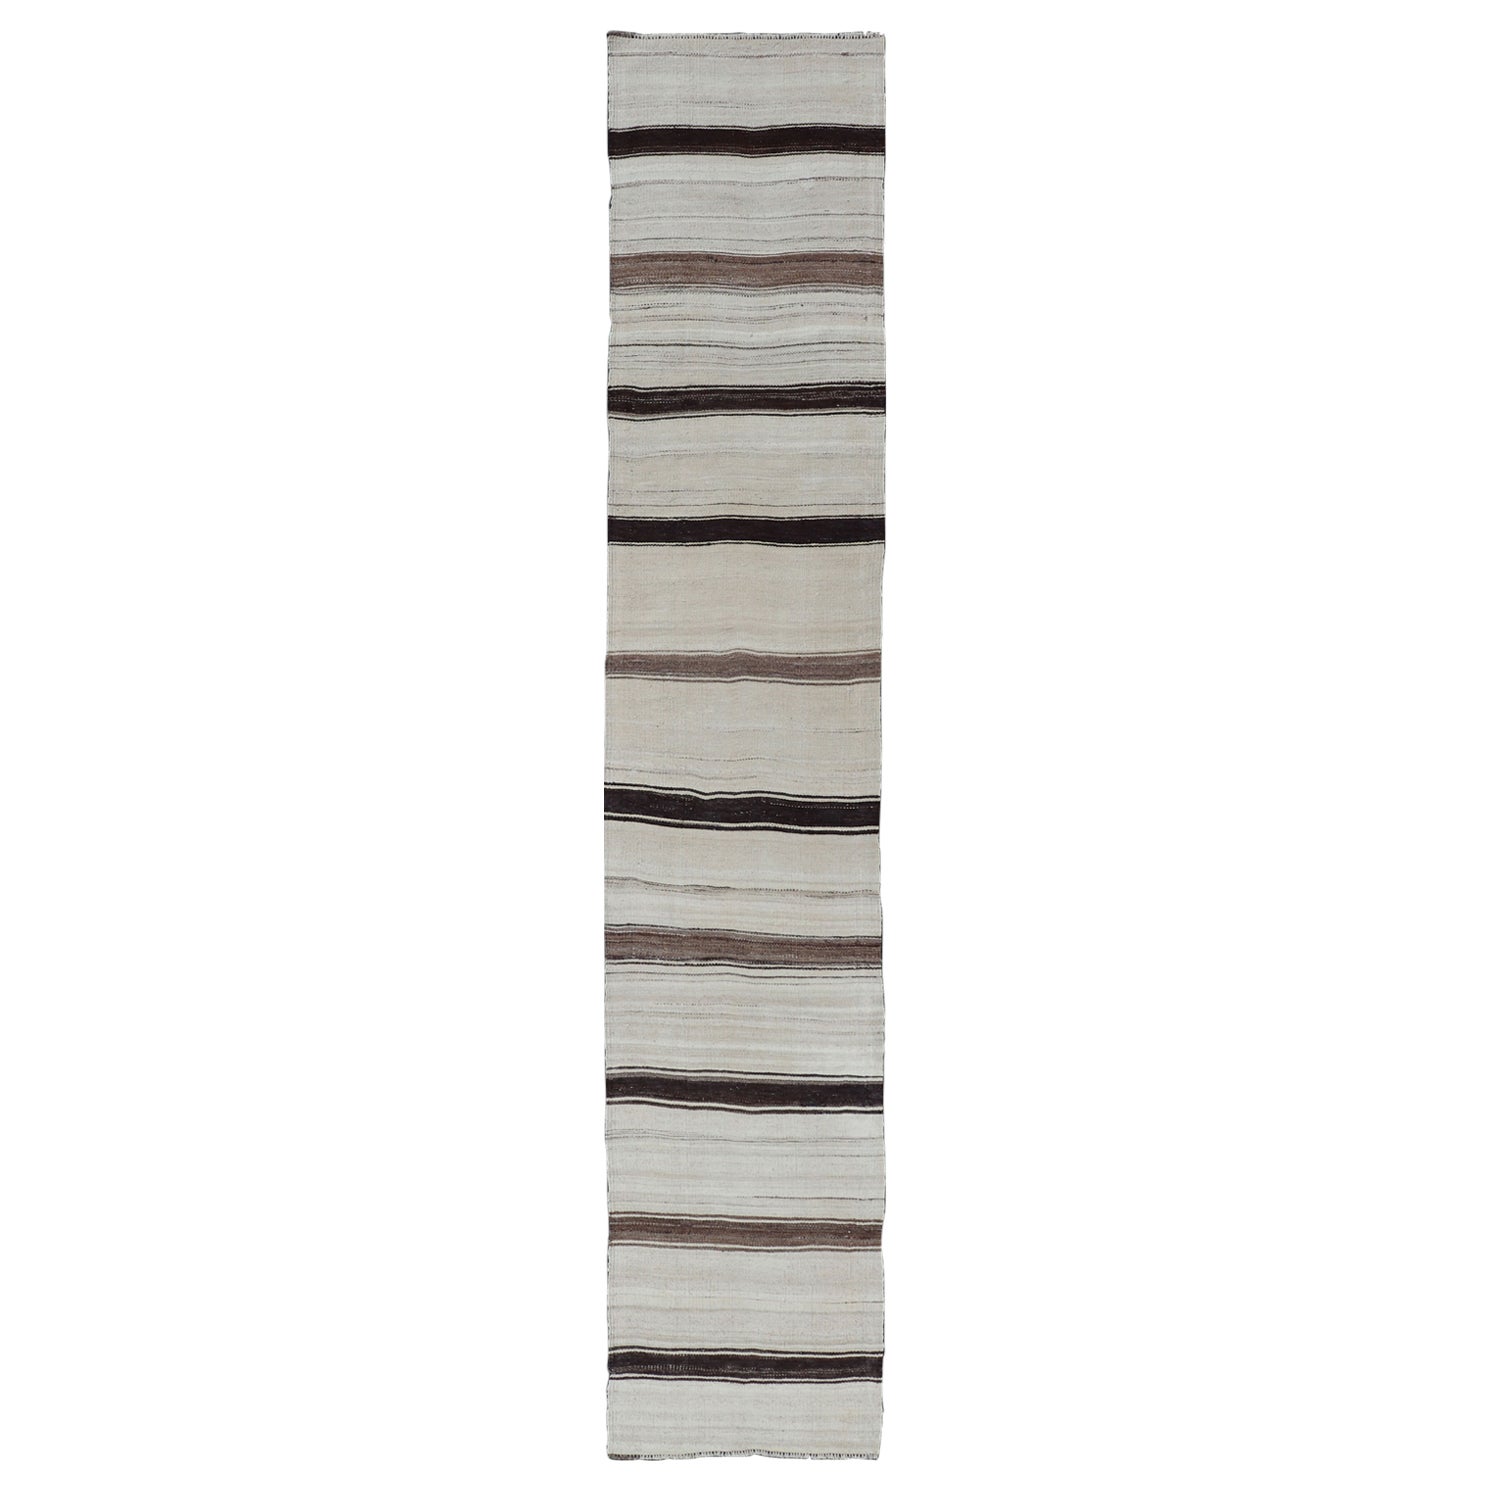 Vintage Turkish Striped Kilim Runner in White, Black, Brown and Tan For Sale